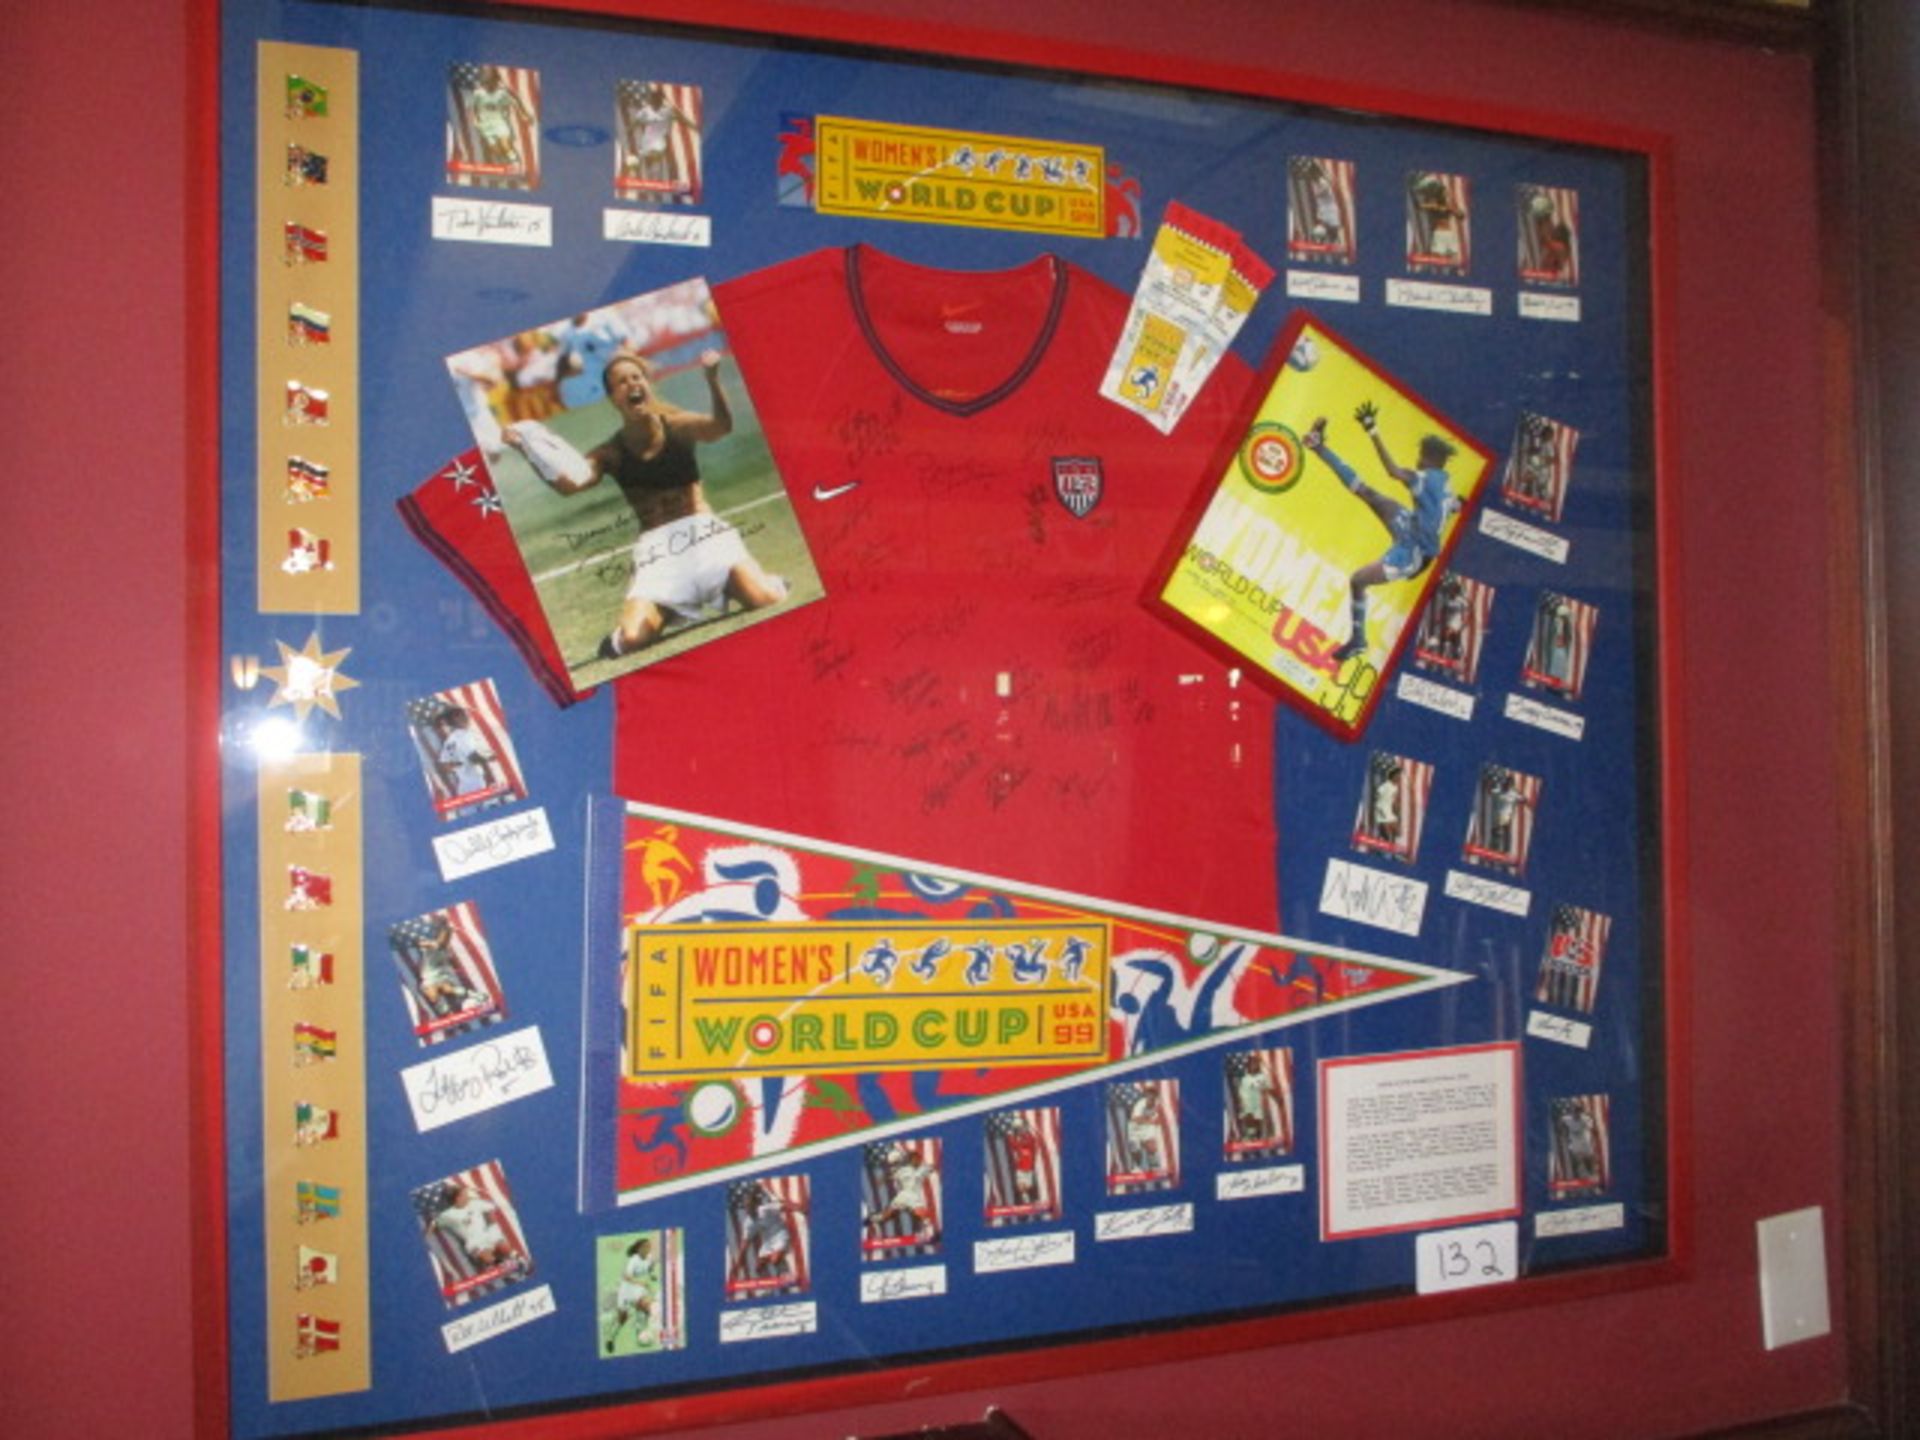 U.S.National 1999 World Cup champ signed jersey against China in Los Angelus, also included